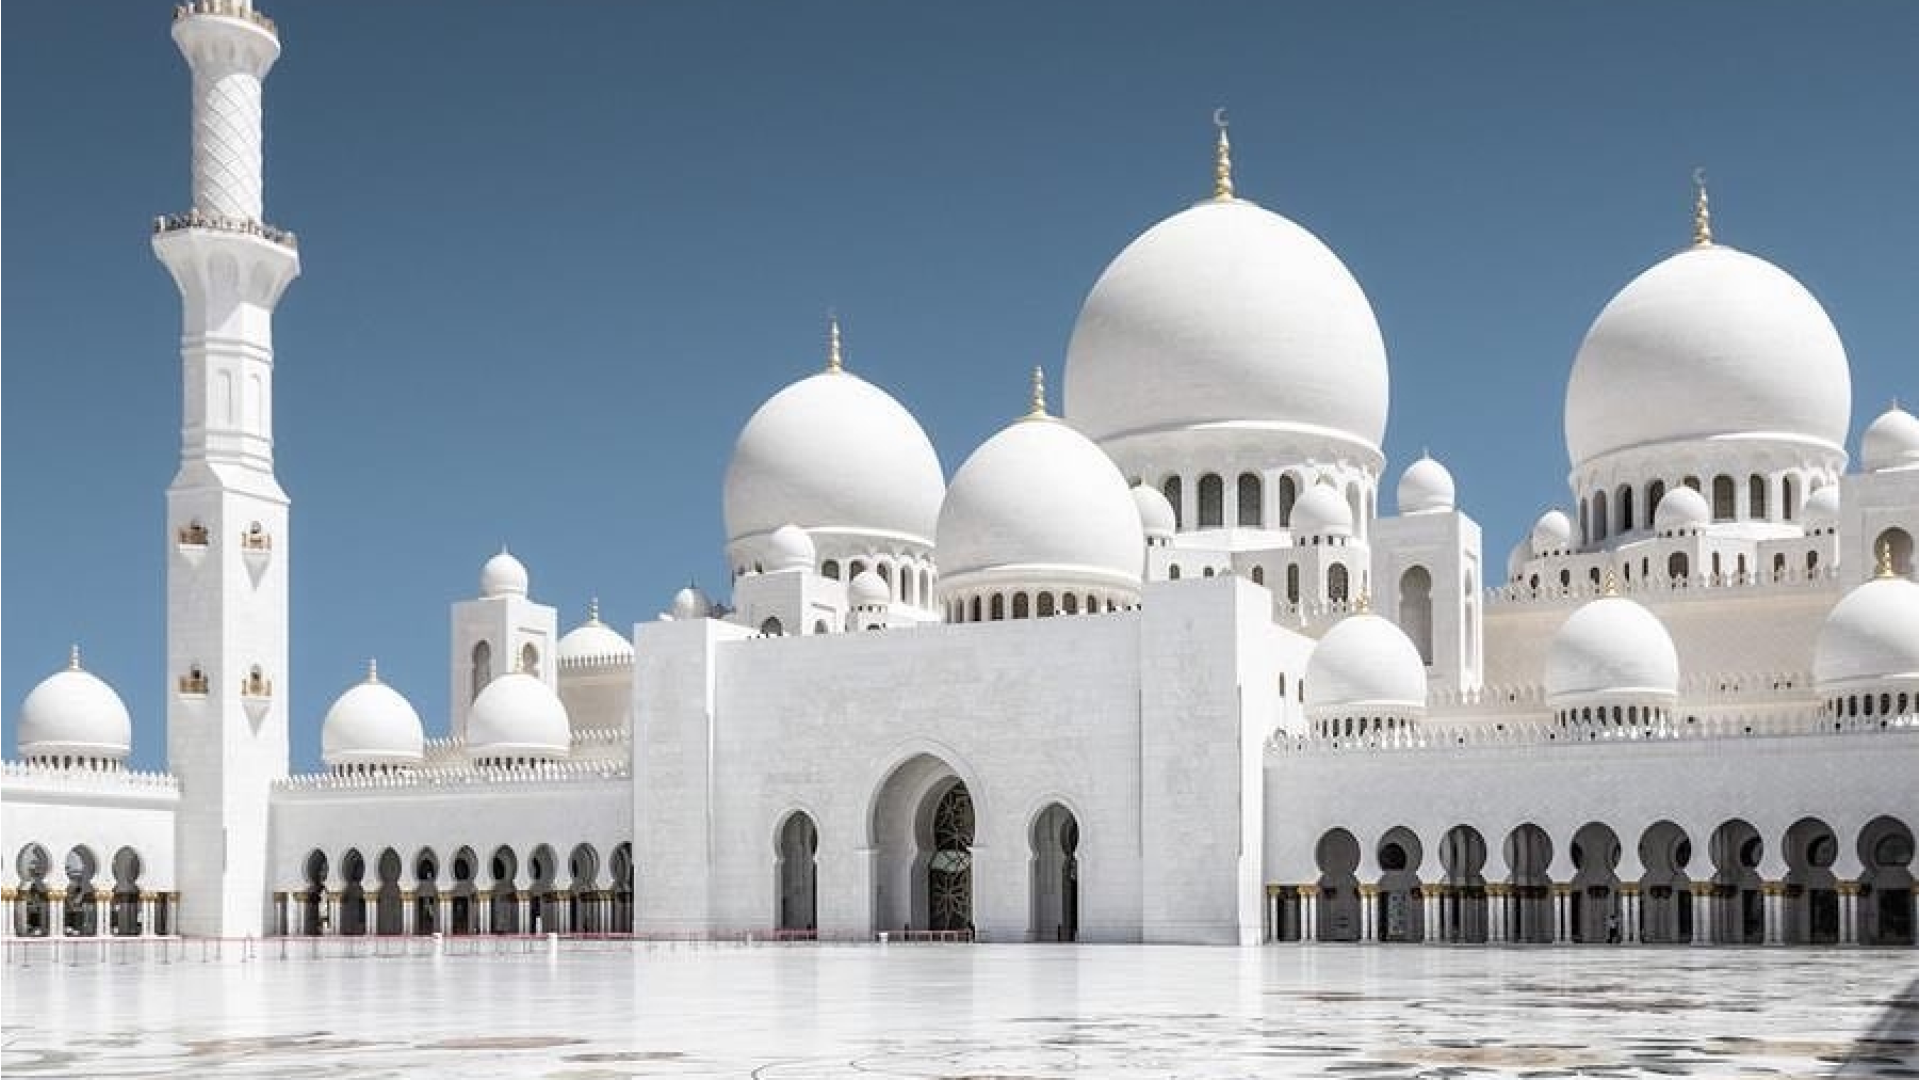 12 Free Attractions to Explore in Abu Dhabi